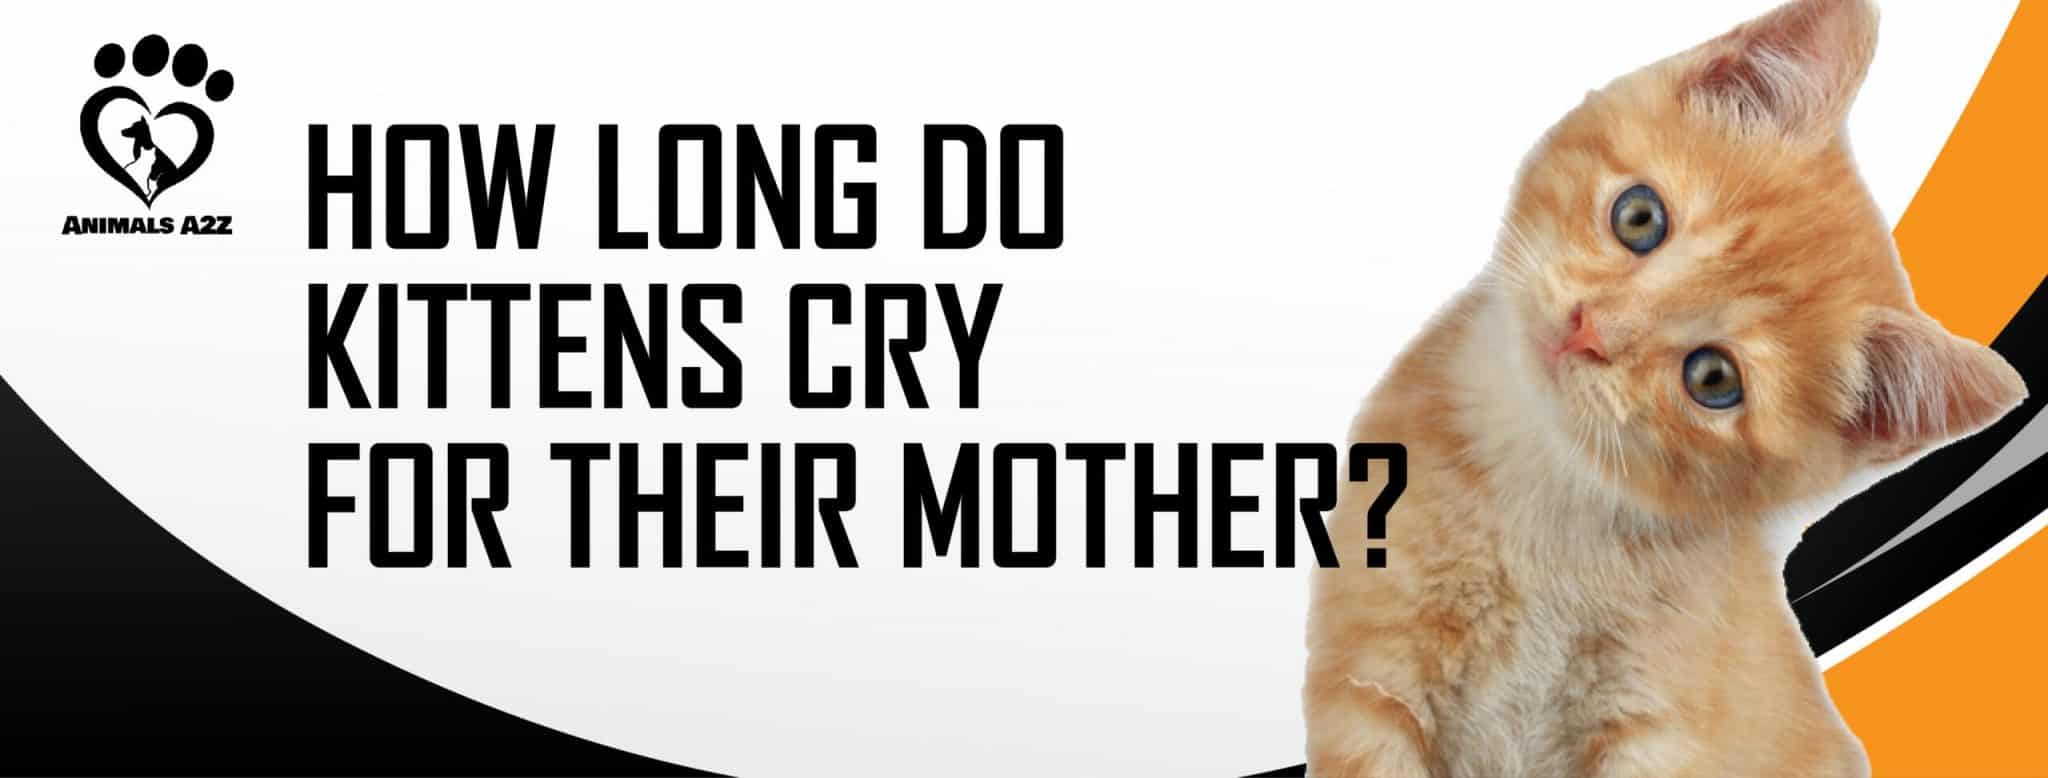 How long do kittens cry for their mother? Detailed Answer